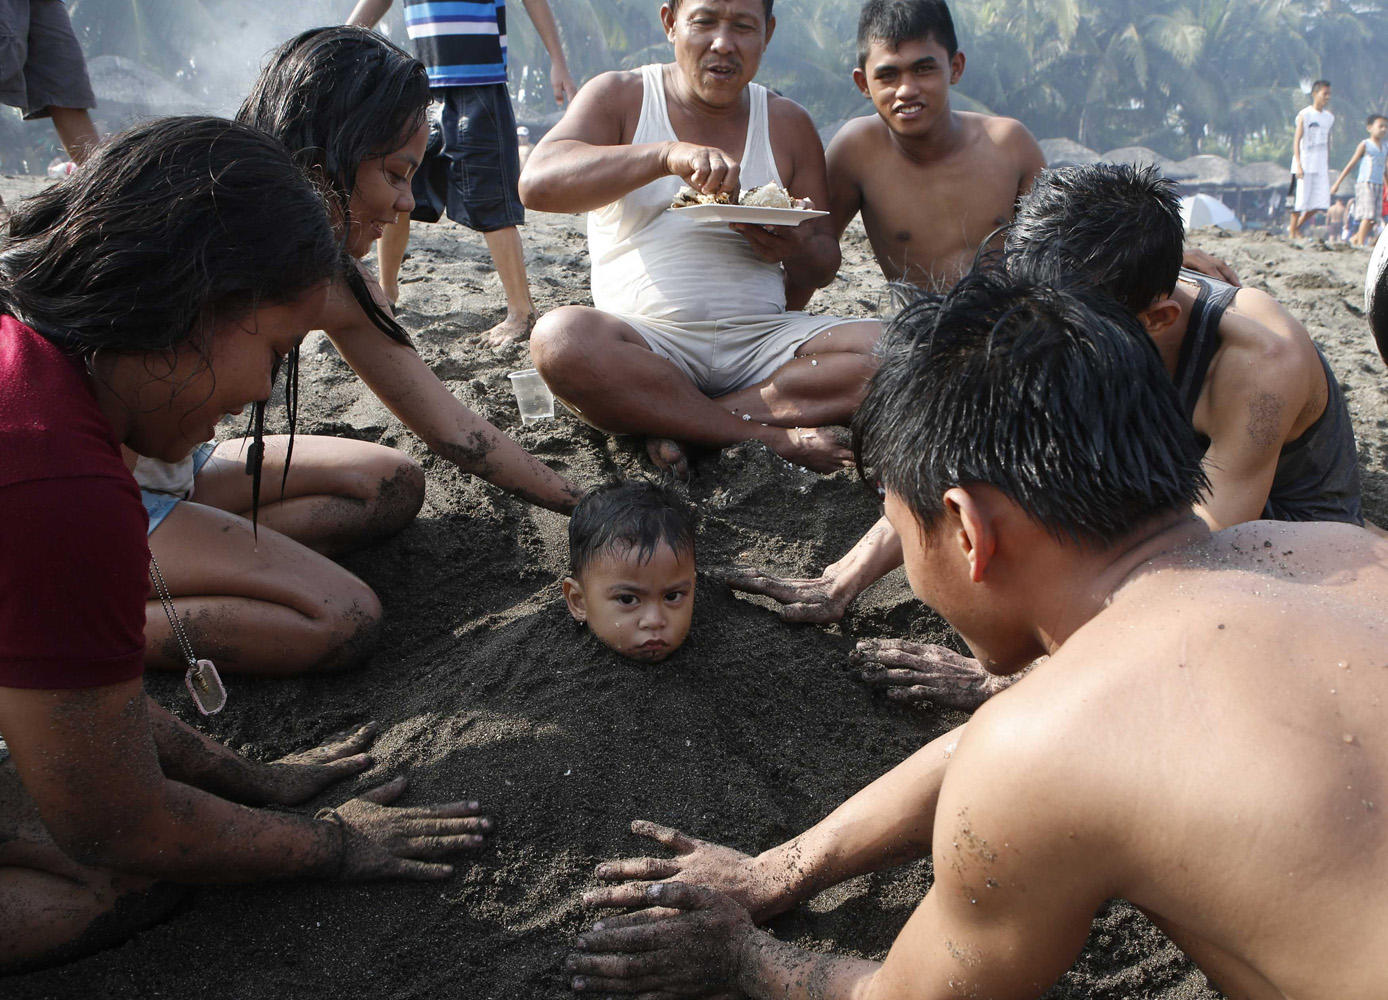 A family helps bury a boy in sand at a beach to celebrate Easter Sunday, near Manila Bay in Cavite province April 20, 2014.